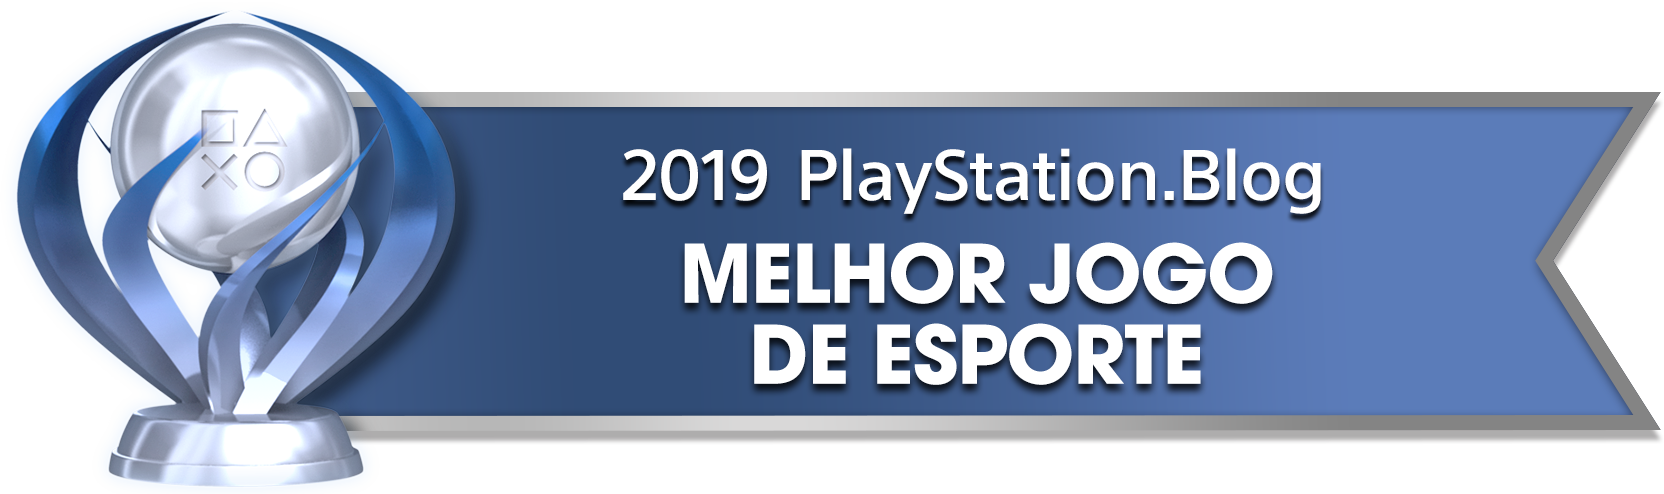 PS Blog Game of the Year 2019 - Best Sports Game - 1 - Platinum